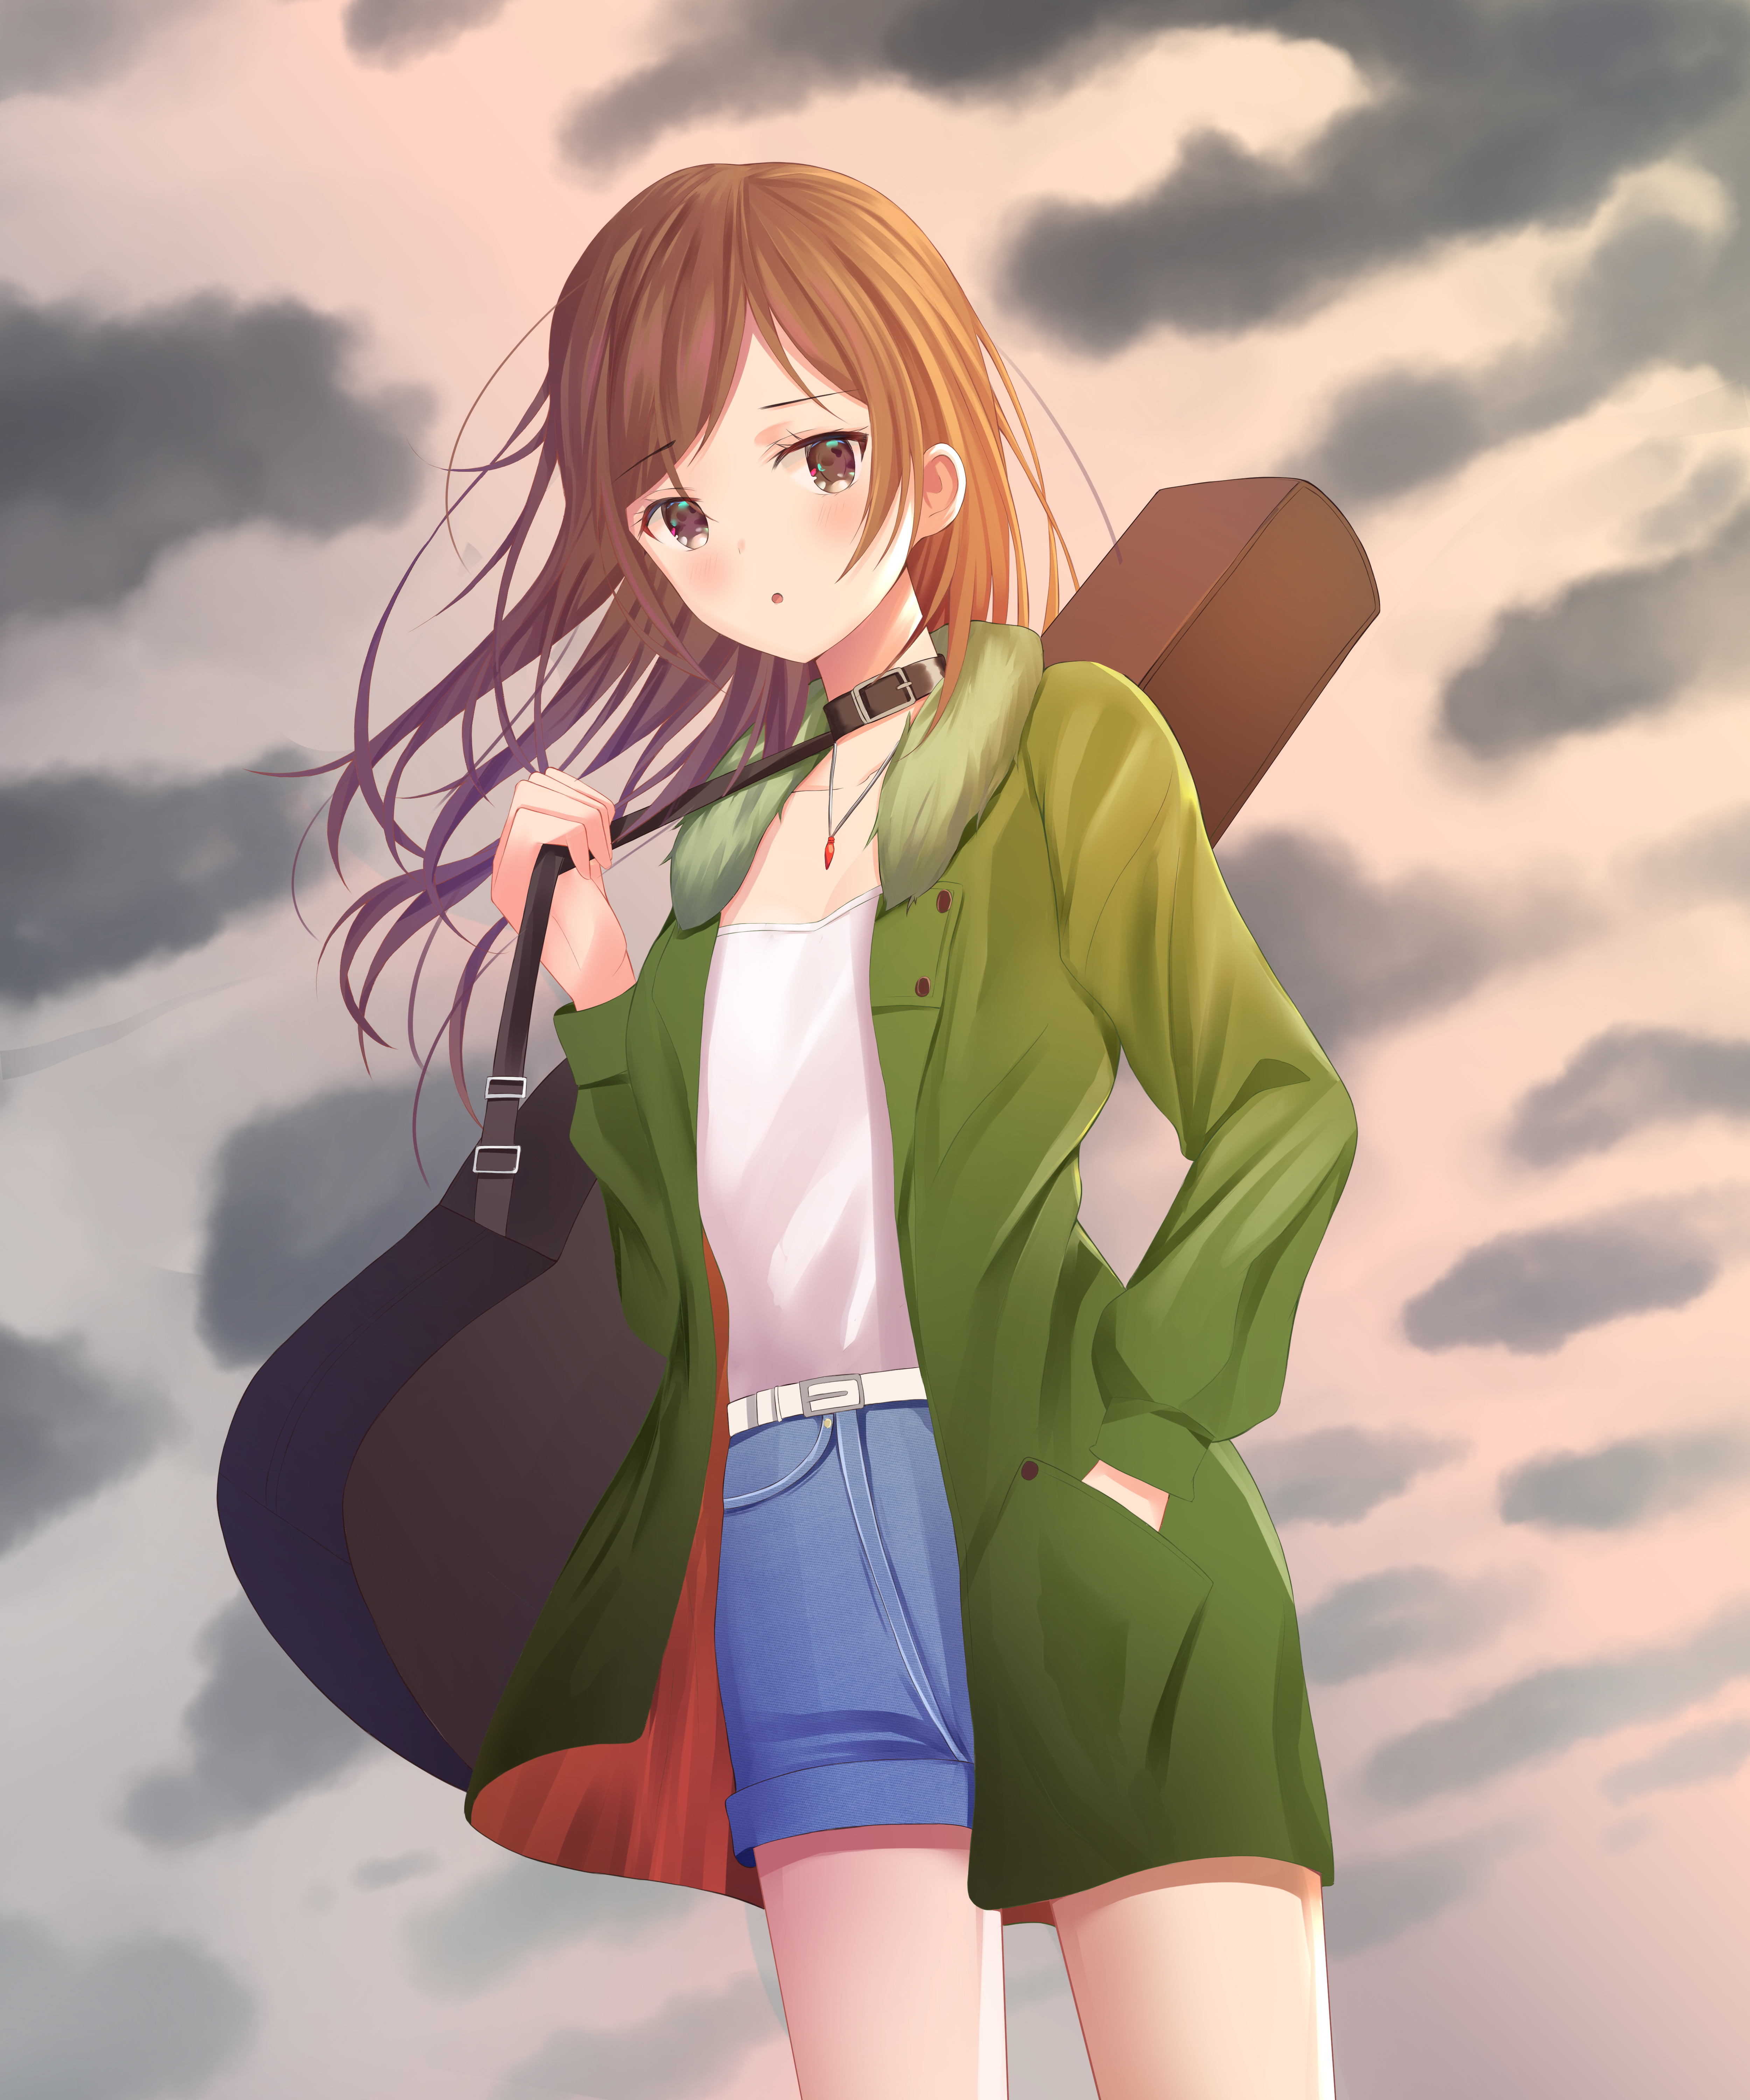 girl, anime, clouds, guitar, case, sheath cell phone wallpapers